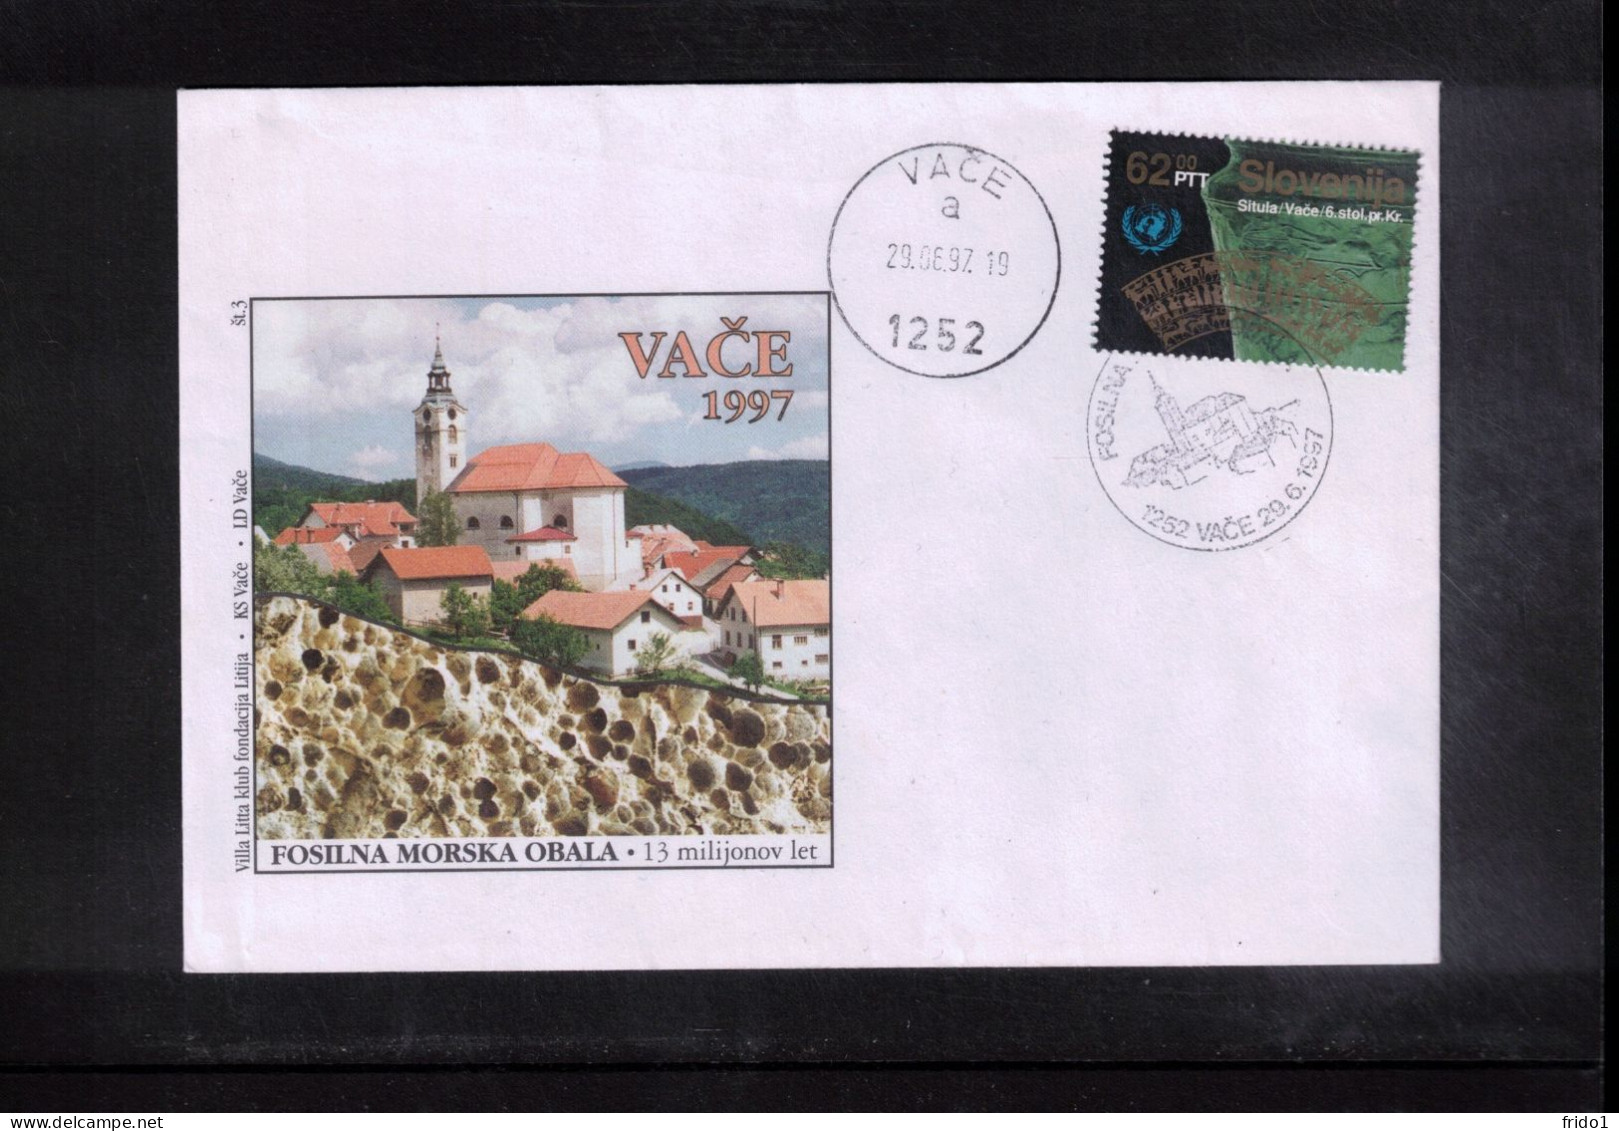 Slovenia 1997 Vace  Sea Beech Of Fossils Interesting Cover - Fossiles